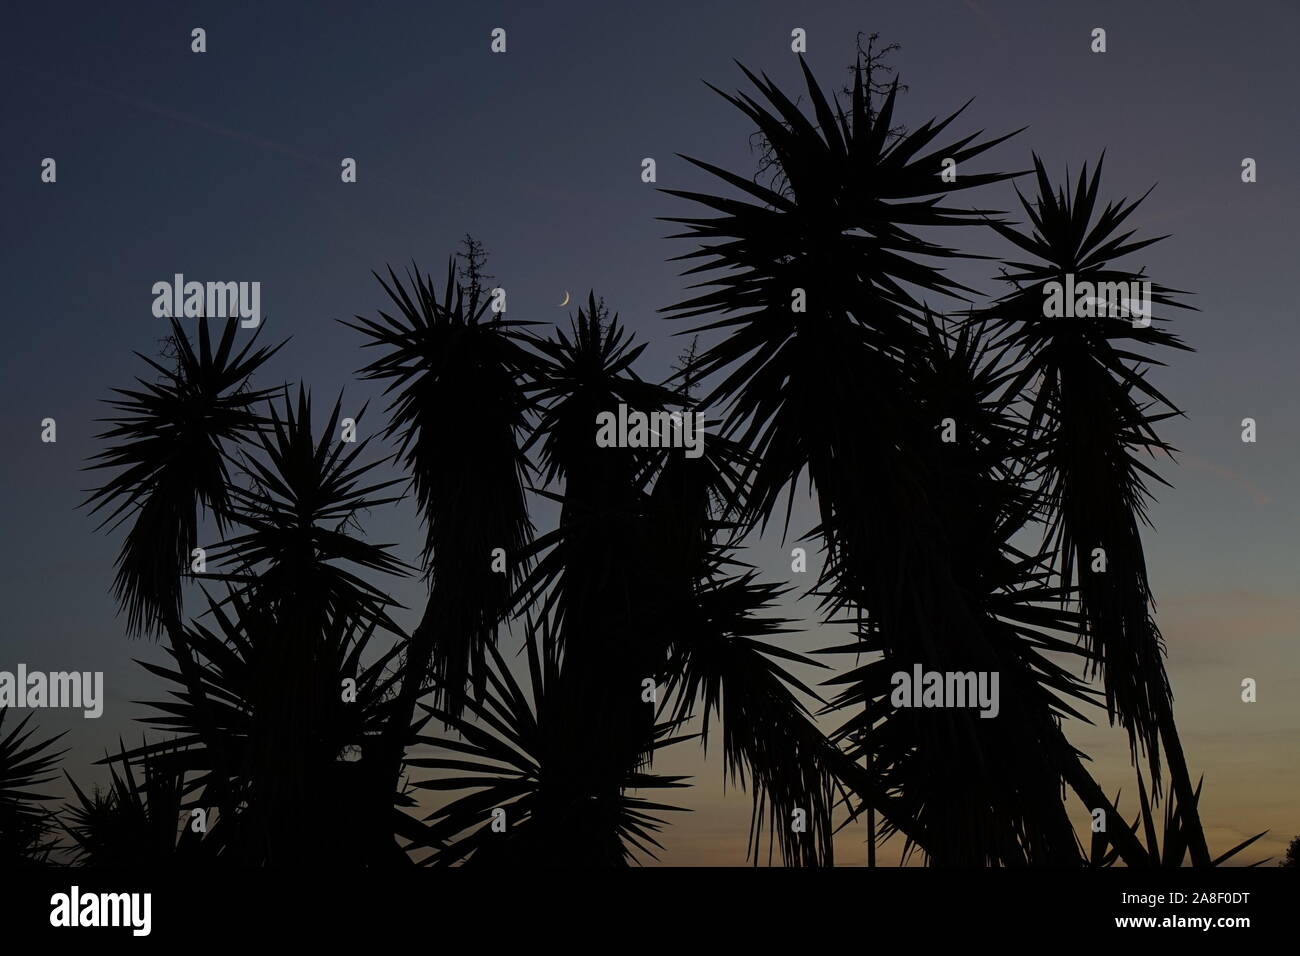 Palm tree silhouette against a twilight sky with the moon crescent Stock Photo